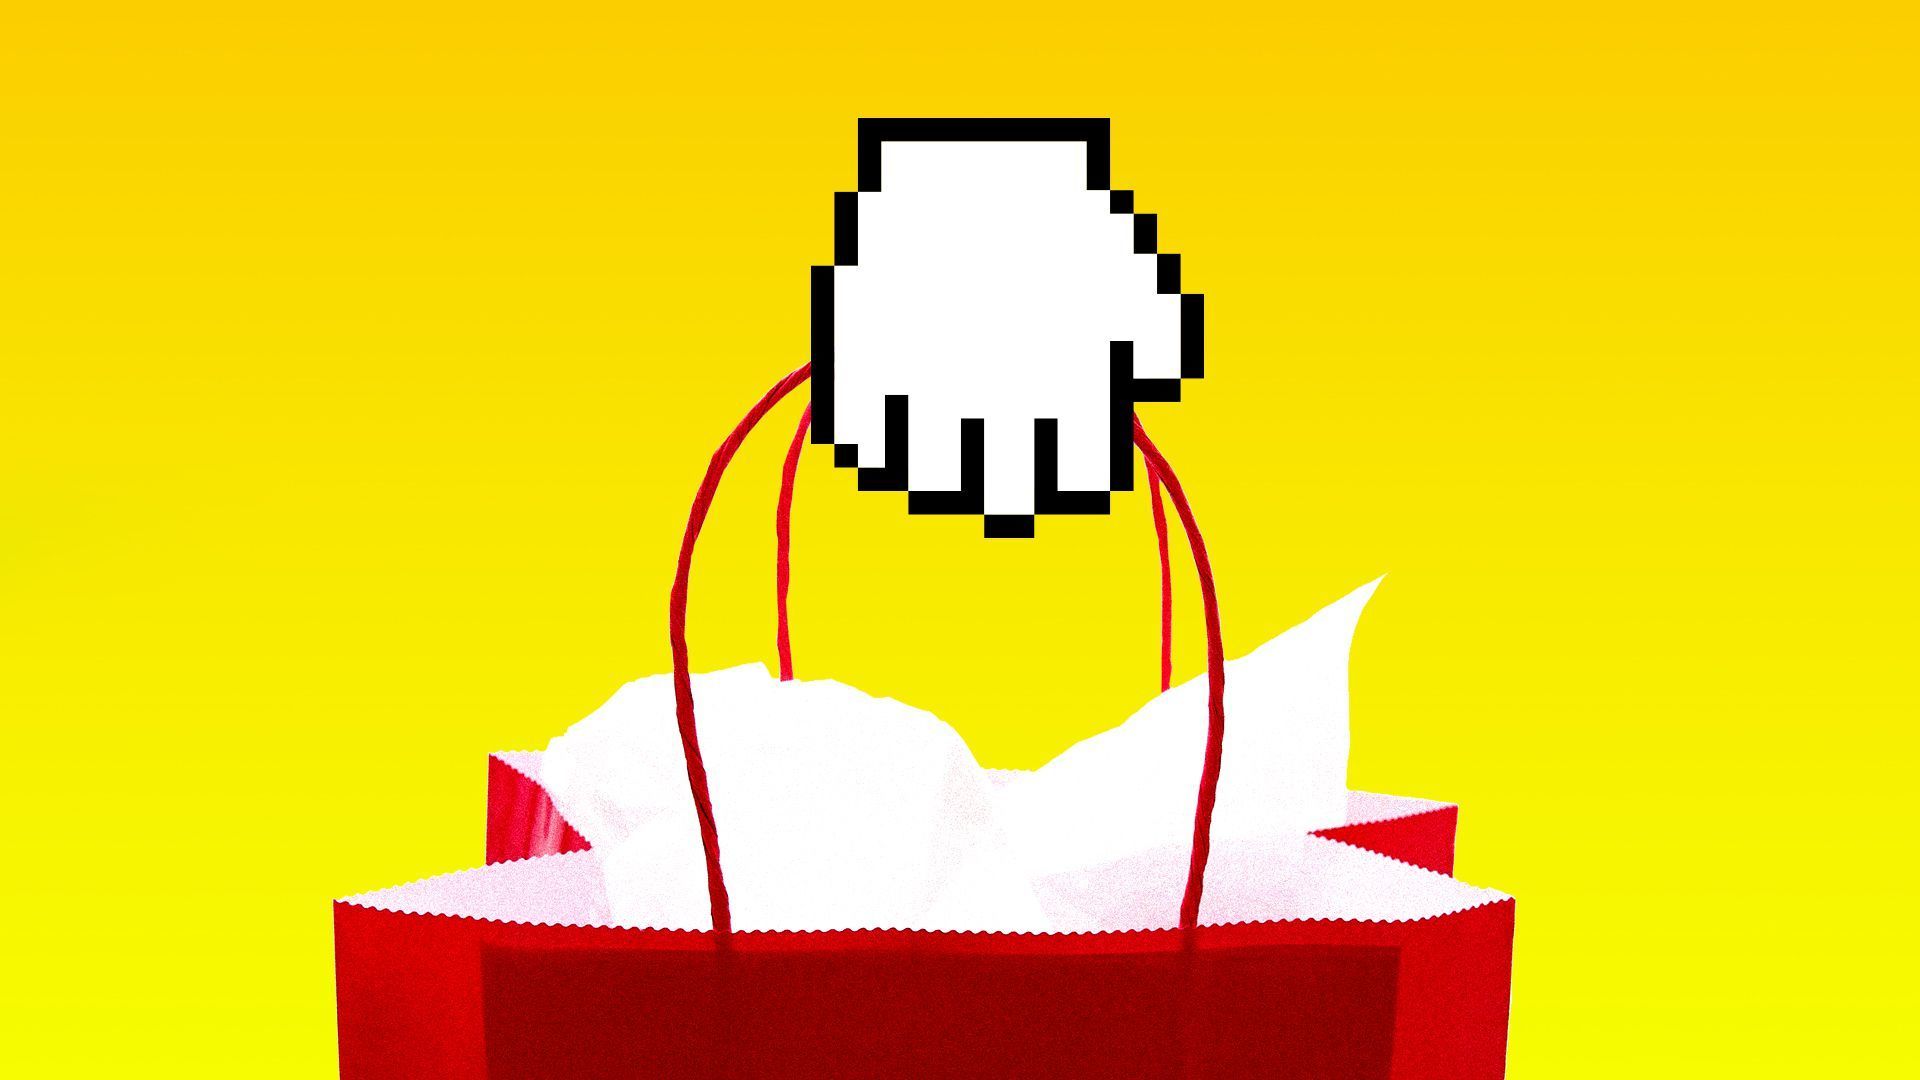 An illustration of a shopping bag with a hand icon, representing the intersection of digital and real-world commerce.